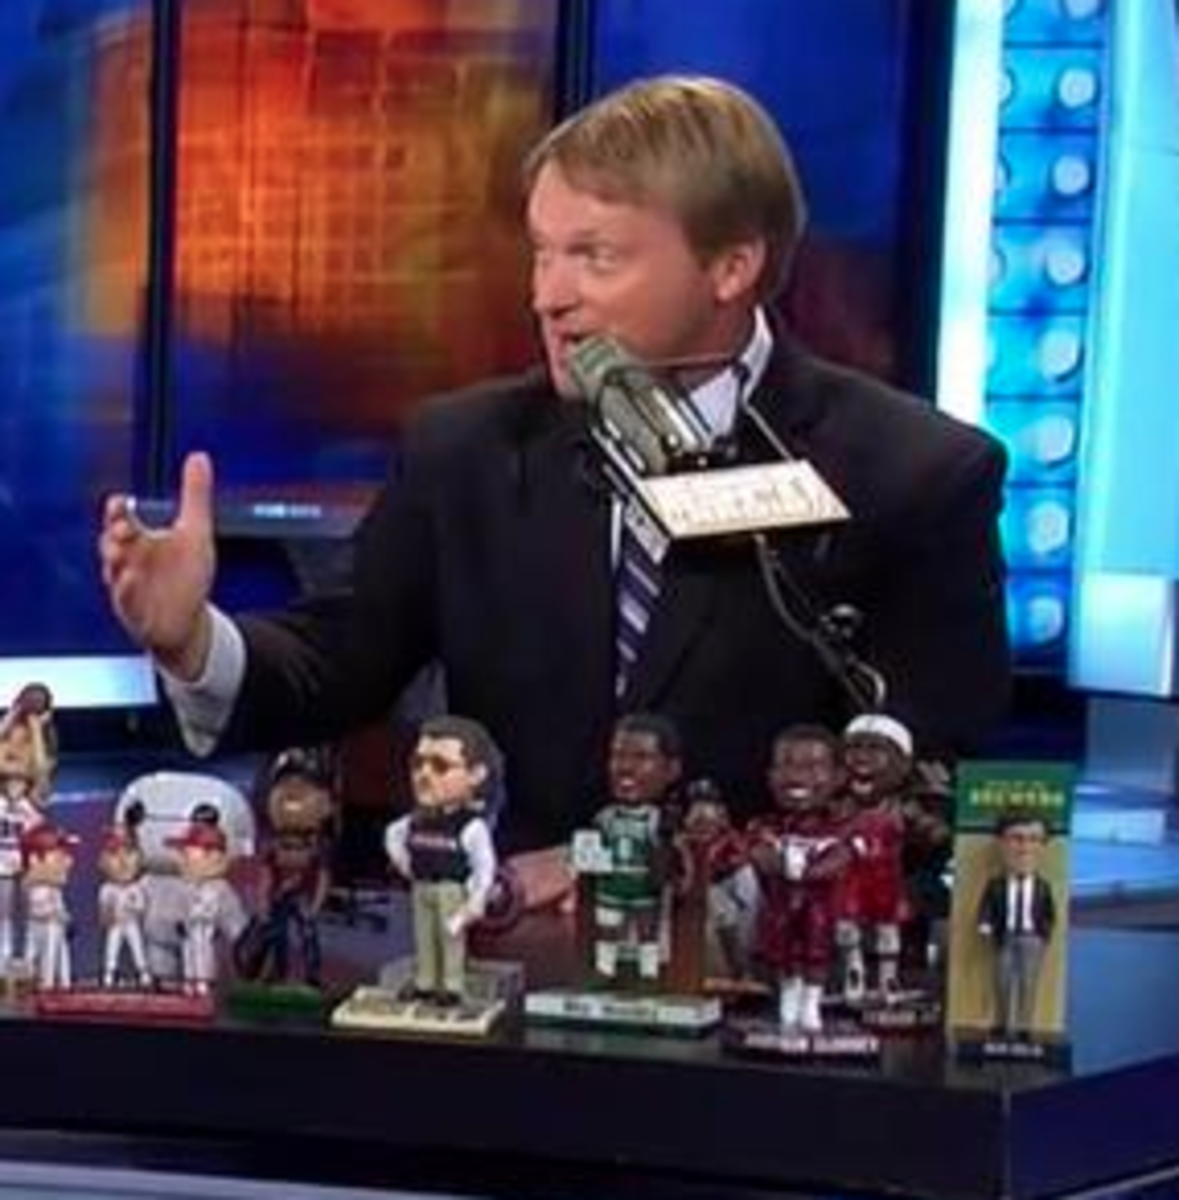 Jon Gruden talks about the Tennessee coaching job while on ESPN.